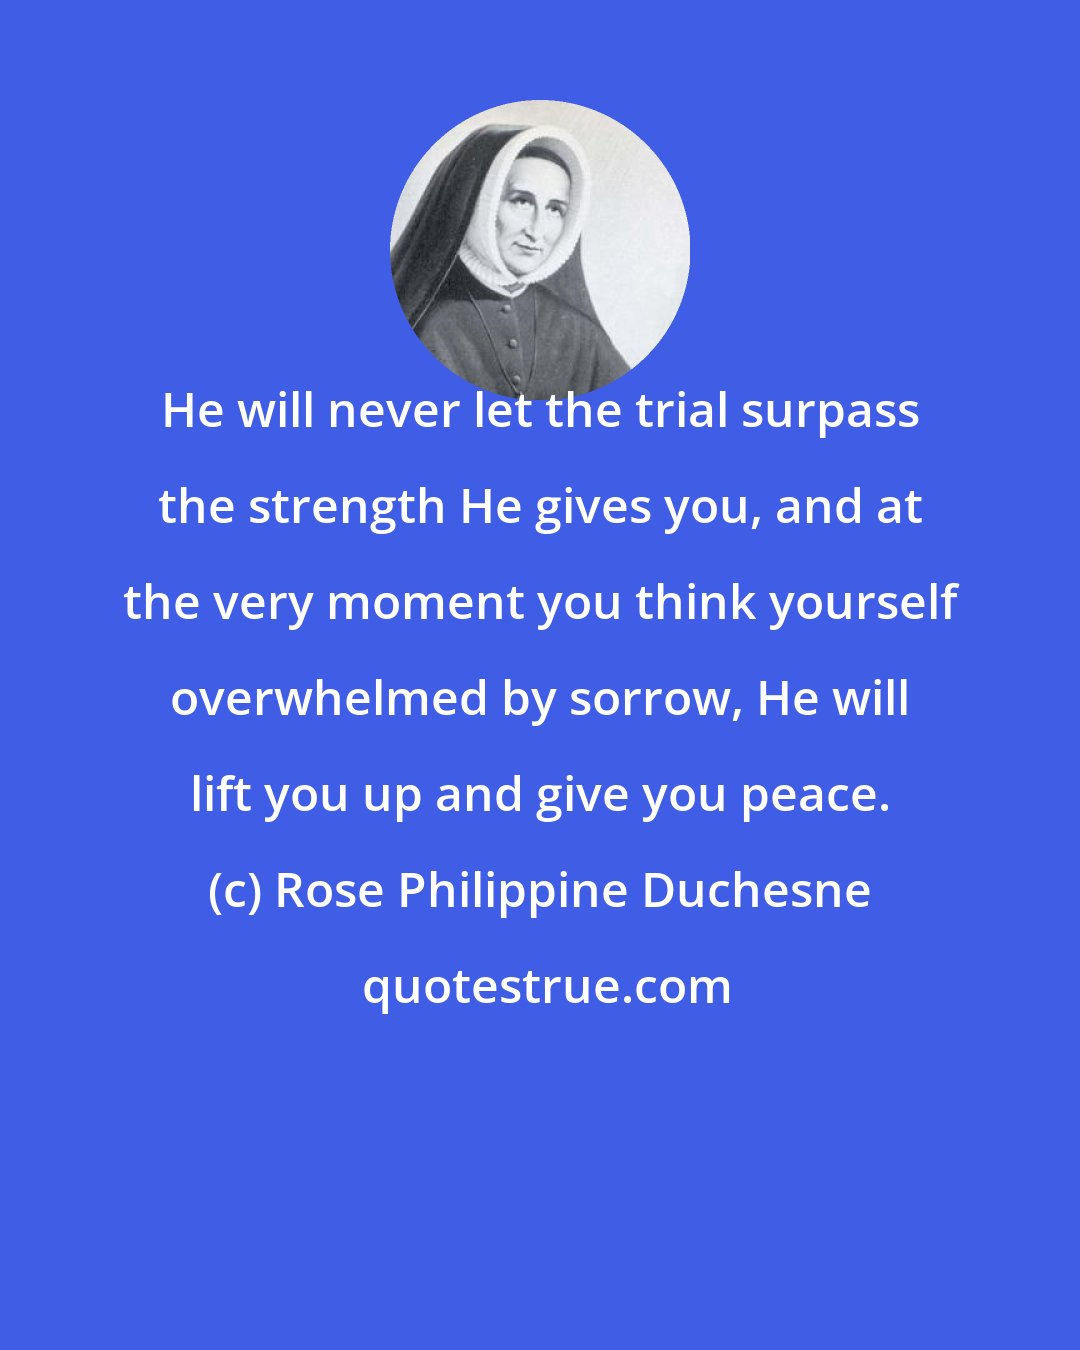 Rose Philippine Duchesne: He will never let the trial surpass the strength He gives you, and at the very moment you think yourself overwhelmed by sorrow, He will lift you up and give you peace.